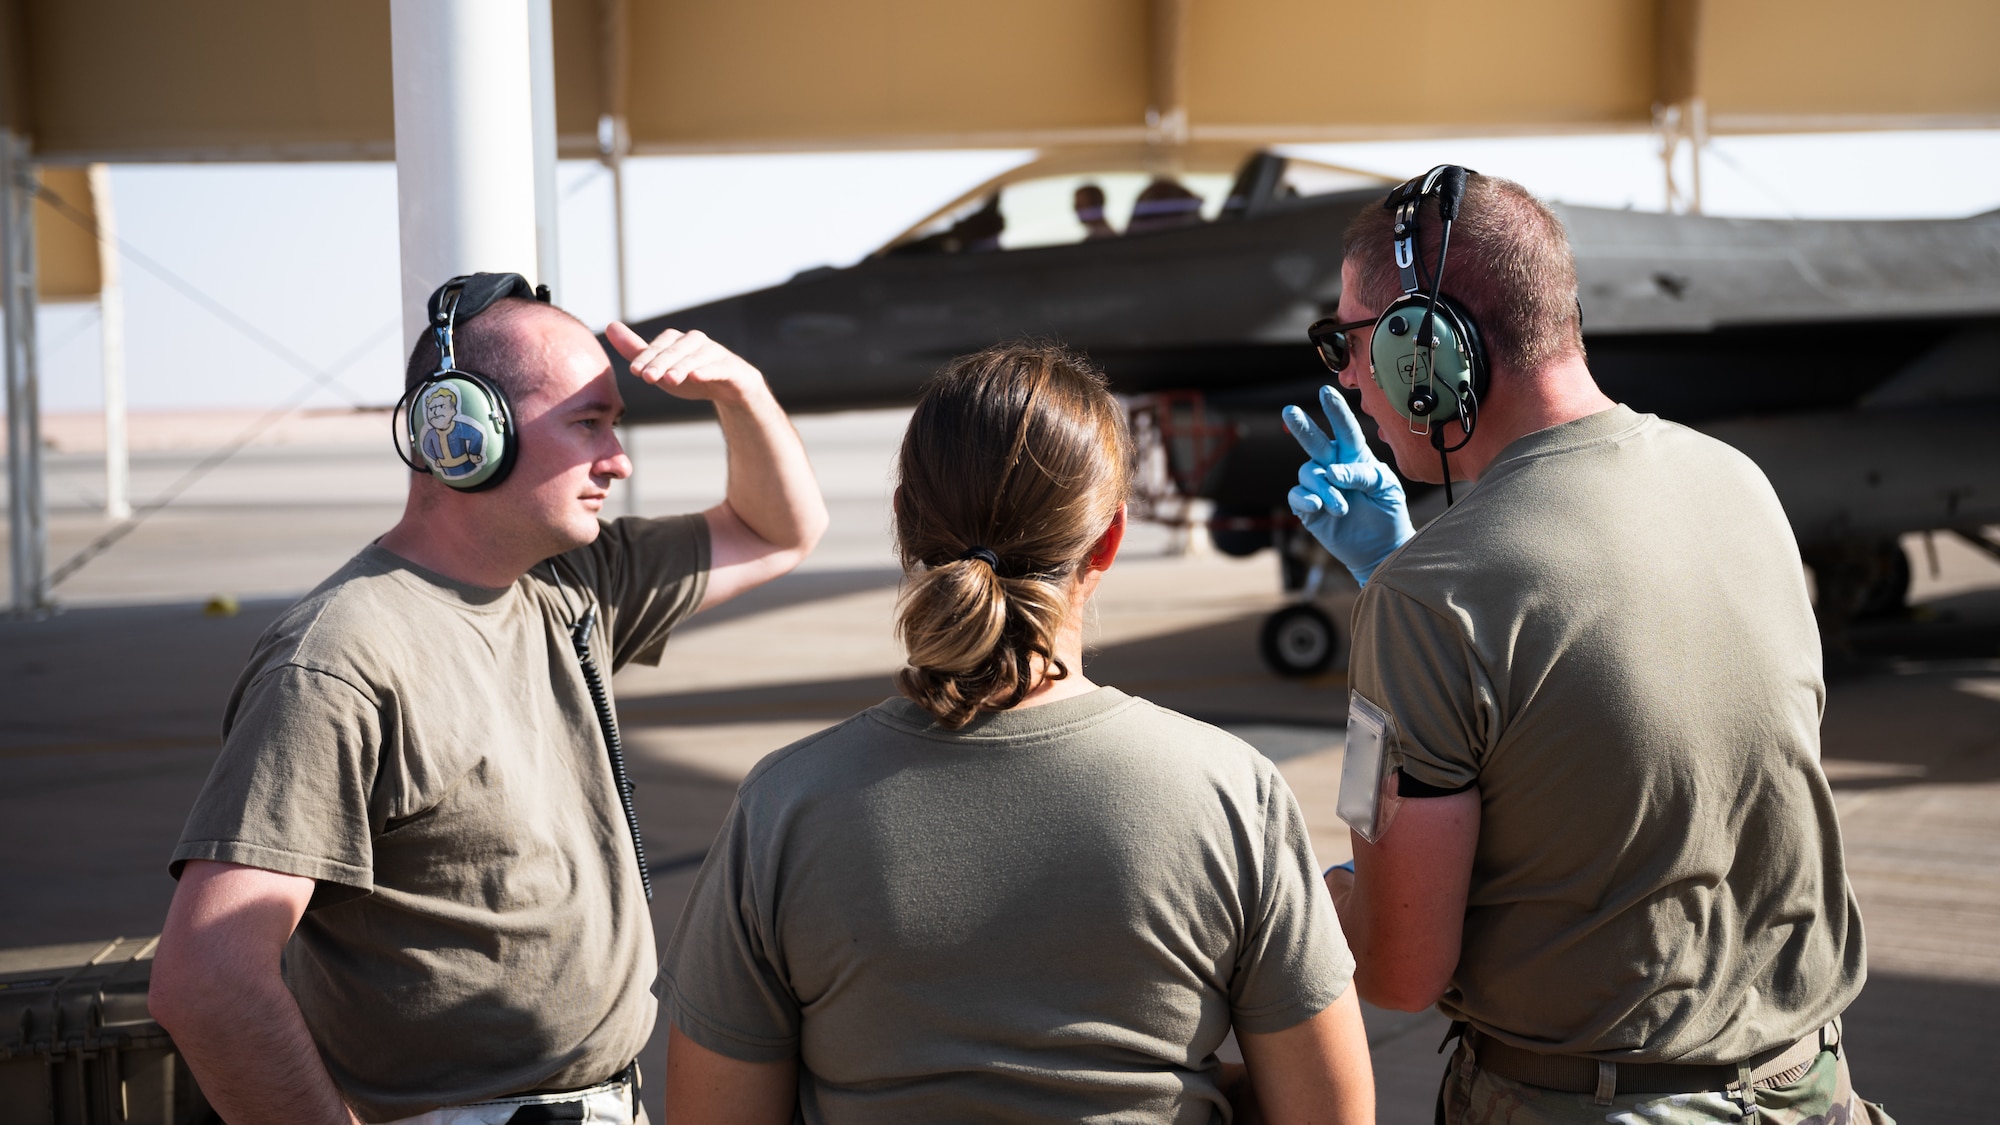 U.S. Air Force Tech. Sgts. Andrew Haupt and Audrey Martinez, left,  379th Expeditionary Maintenance Squadron crew chiefs, receive instruction from Master Sgt. Arik Armstrong, 378th EMXS quality assurance inspector, during an integrated hot-pit training at Prince Sultan Air Base, Kingdom of Saudi Arabia, Nov. 27, 2021. Primarily trained on cargo and tanker aircraft, the Airmen from the 379th EMXS traveled to PSAB to undergo a four-day course on F-16 Fighting Falcon hot-pit refueling. (U.S. Air Force photo by Senior Airman Jacob B. Wrightsman)